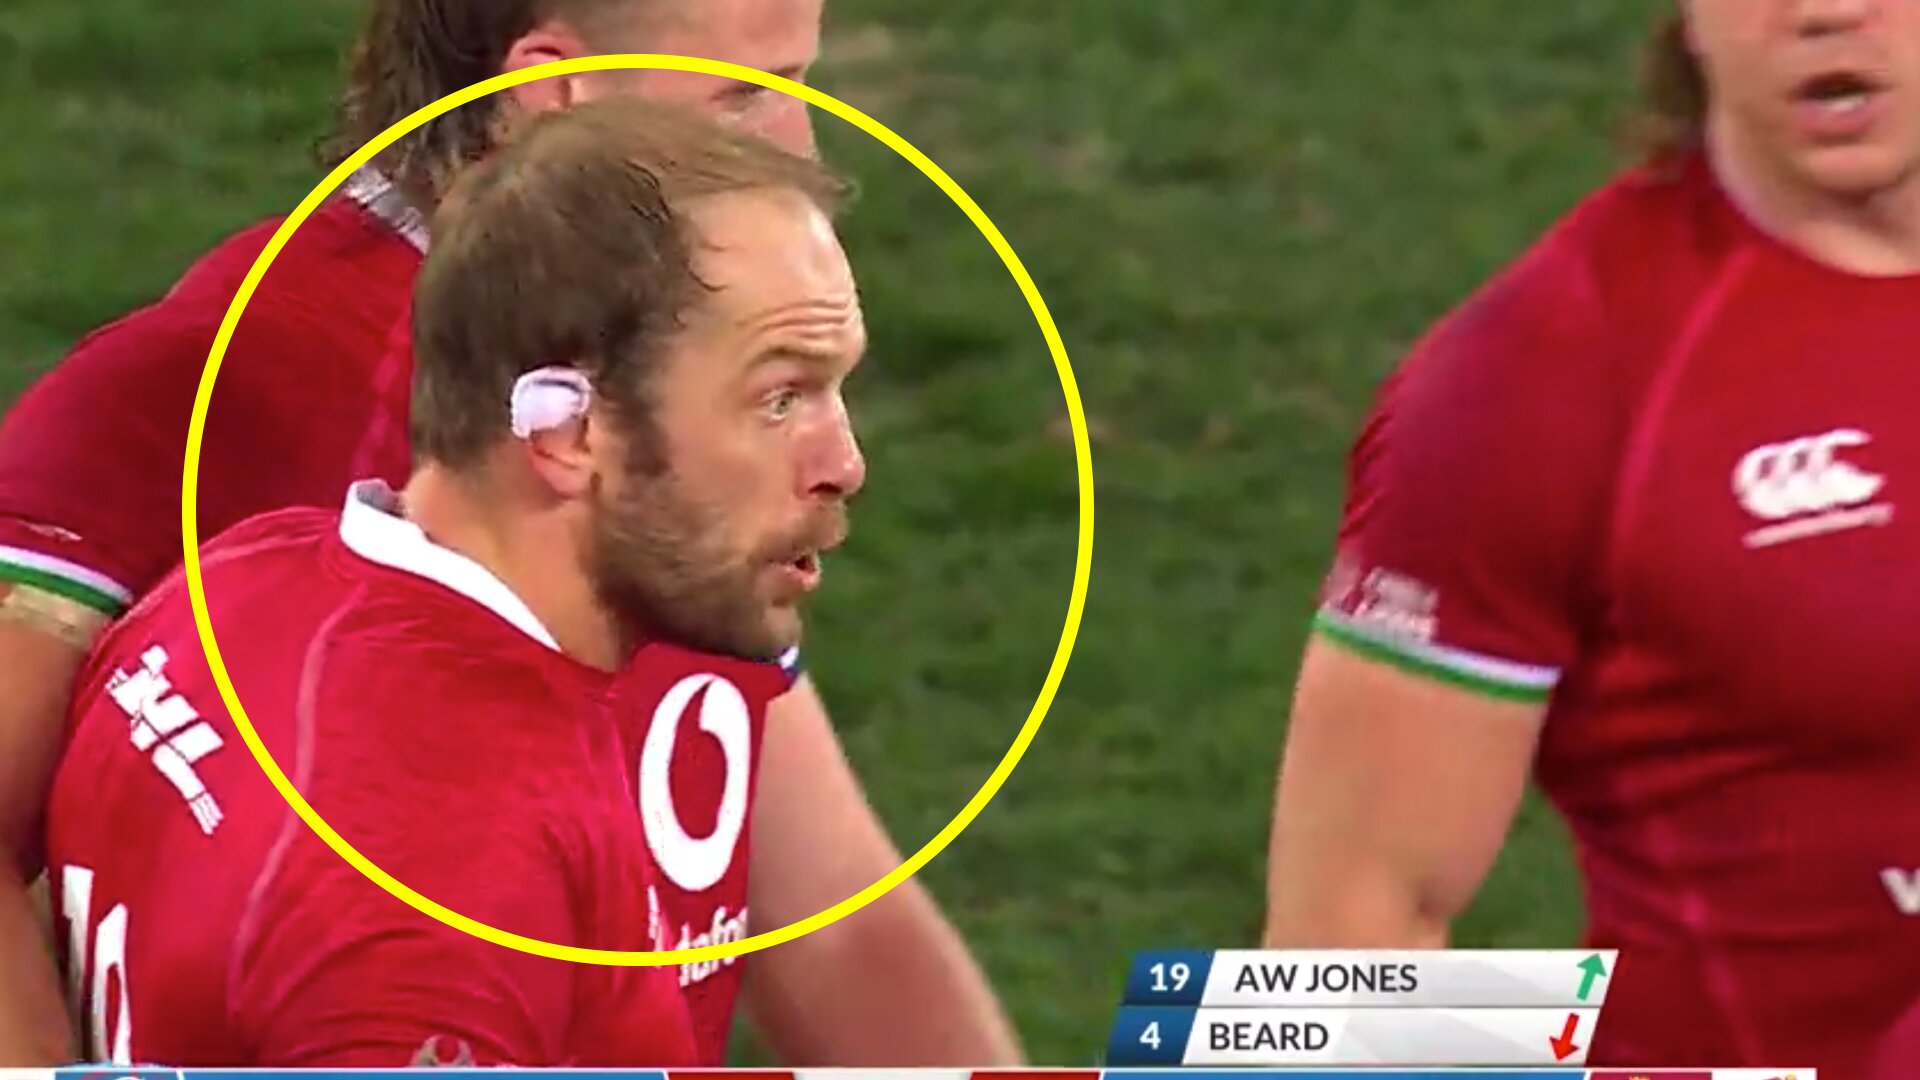 Alun Wyn Jones gets the last laugh over the Boks with his dream pack